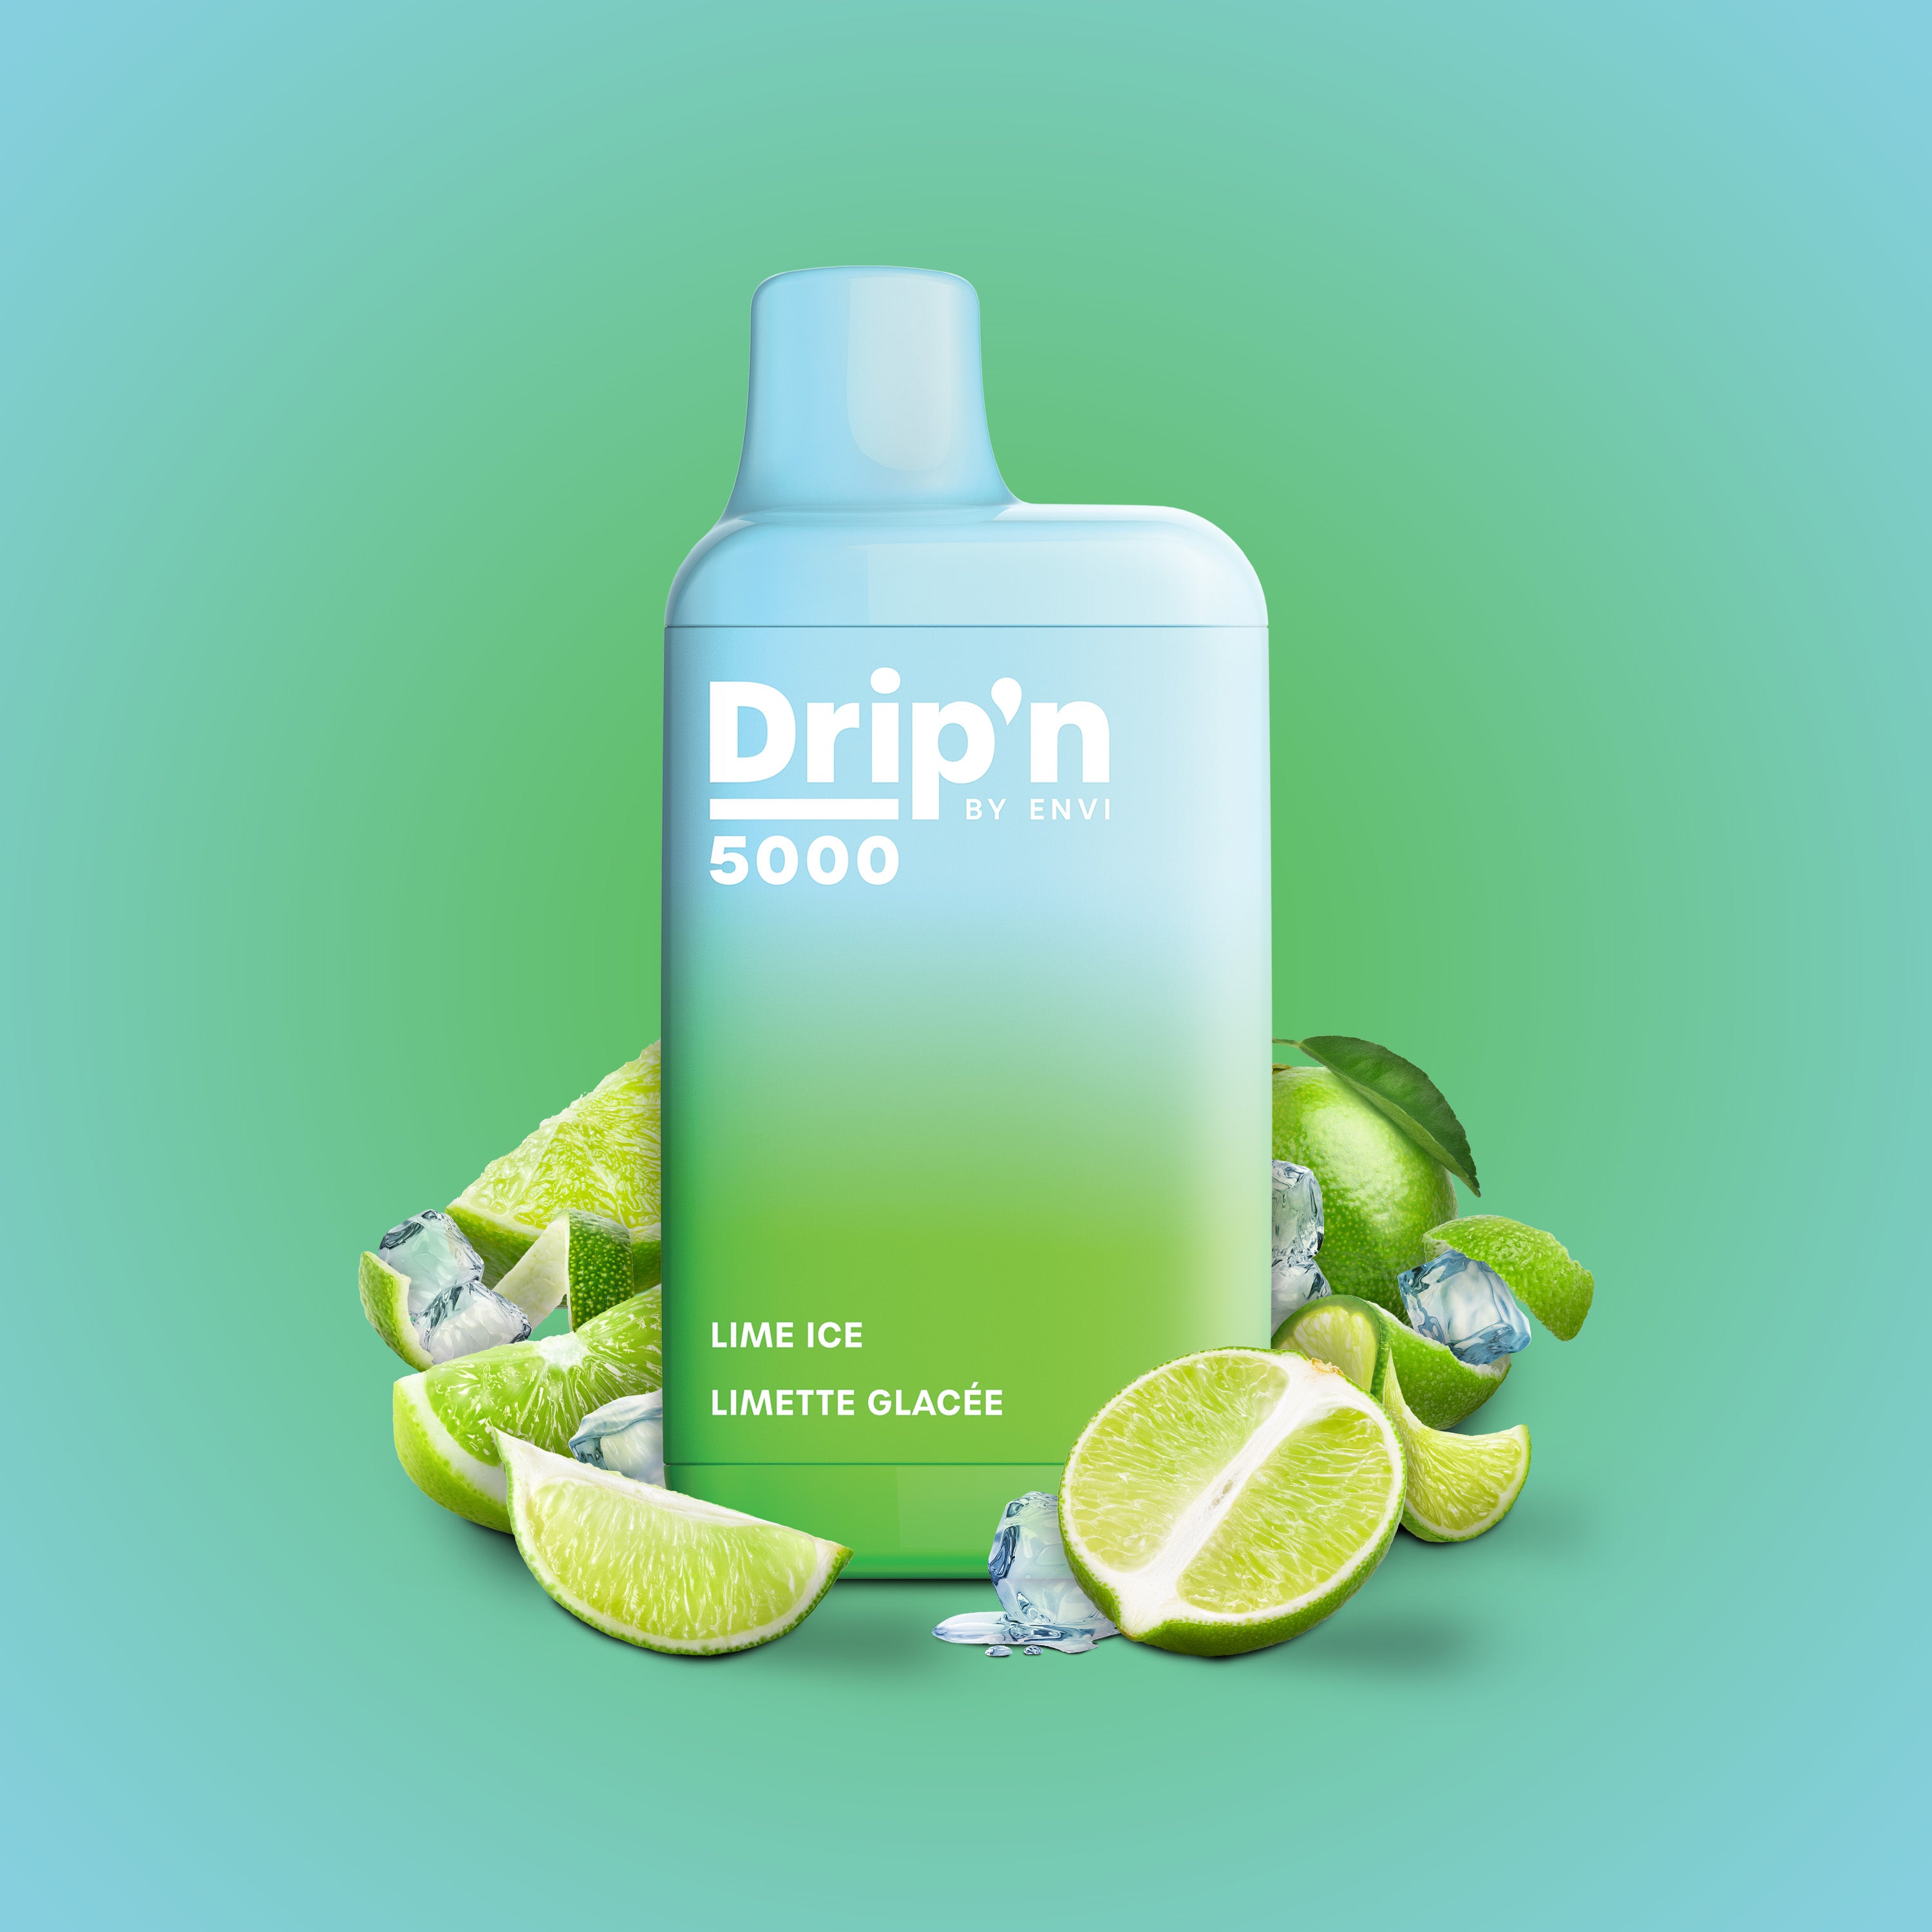 Drip'n by Envi Lime Ice Disposable Vape | Dripin Disposable | Vape4change